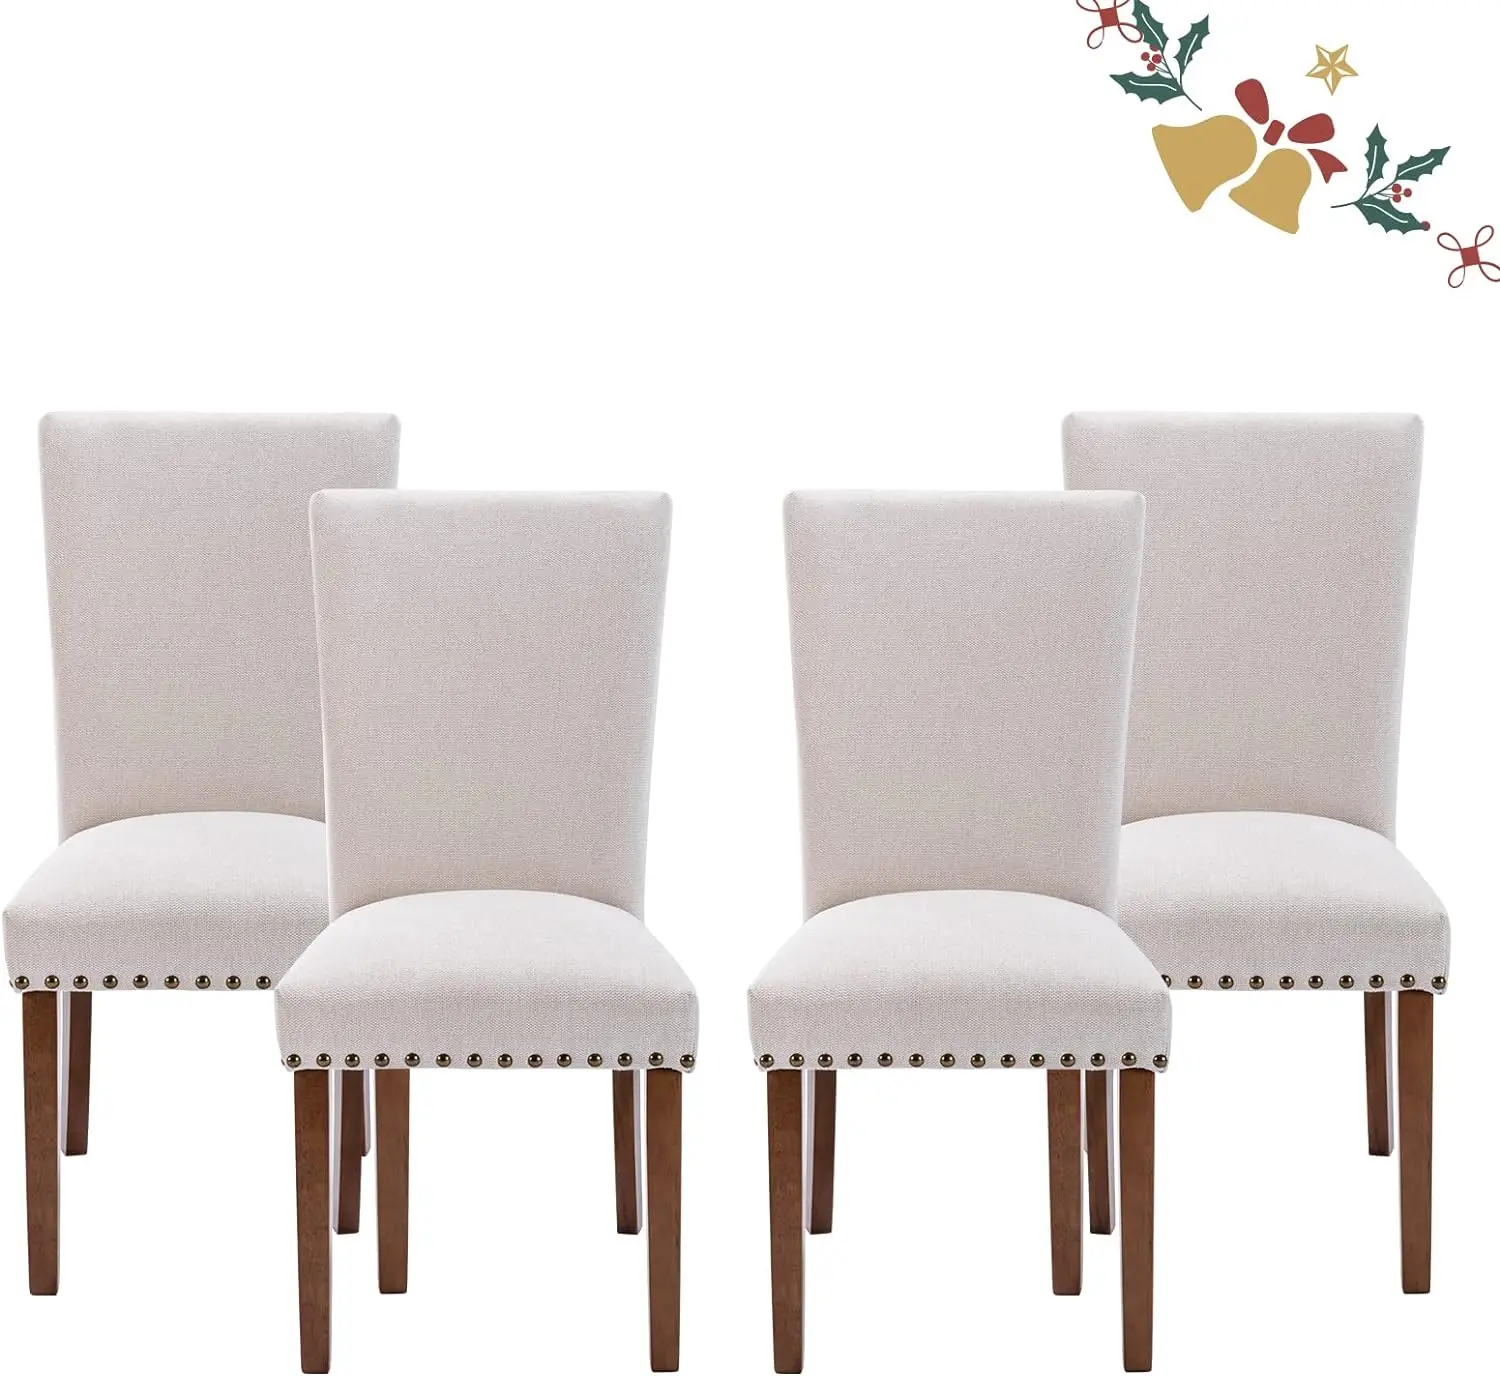 

Parsons Dining Chairs Set of 4, Upholstered Fabric Dining Room Kitchen Side Chair with Nailhead Trim and Wood Legs - Beige